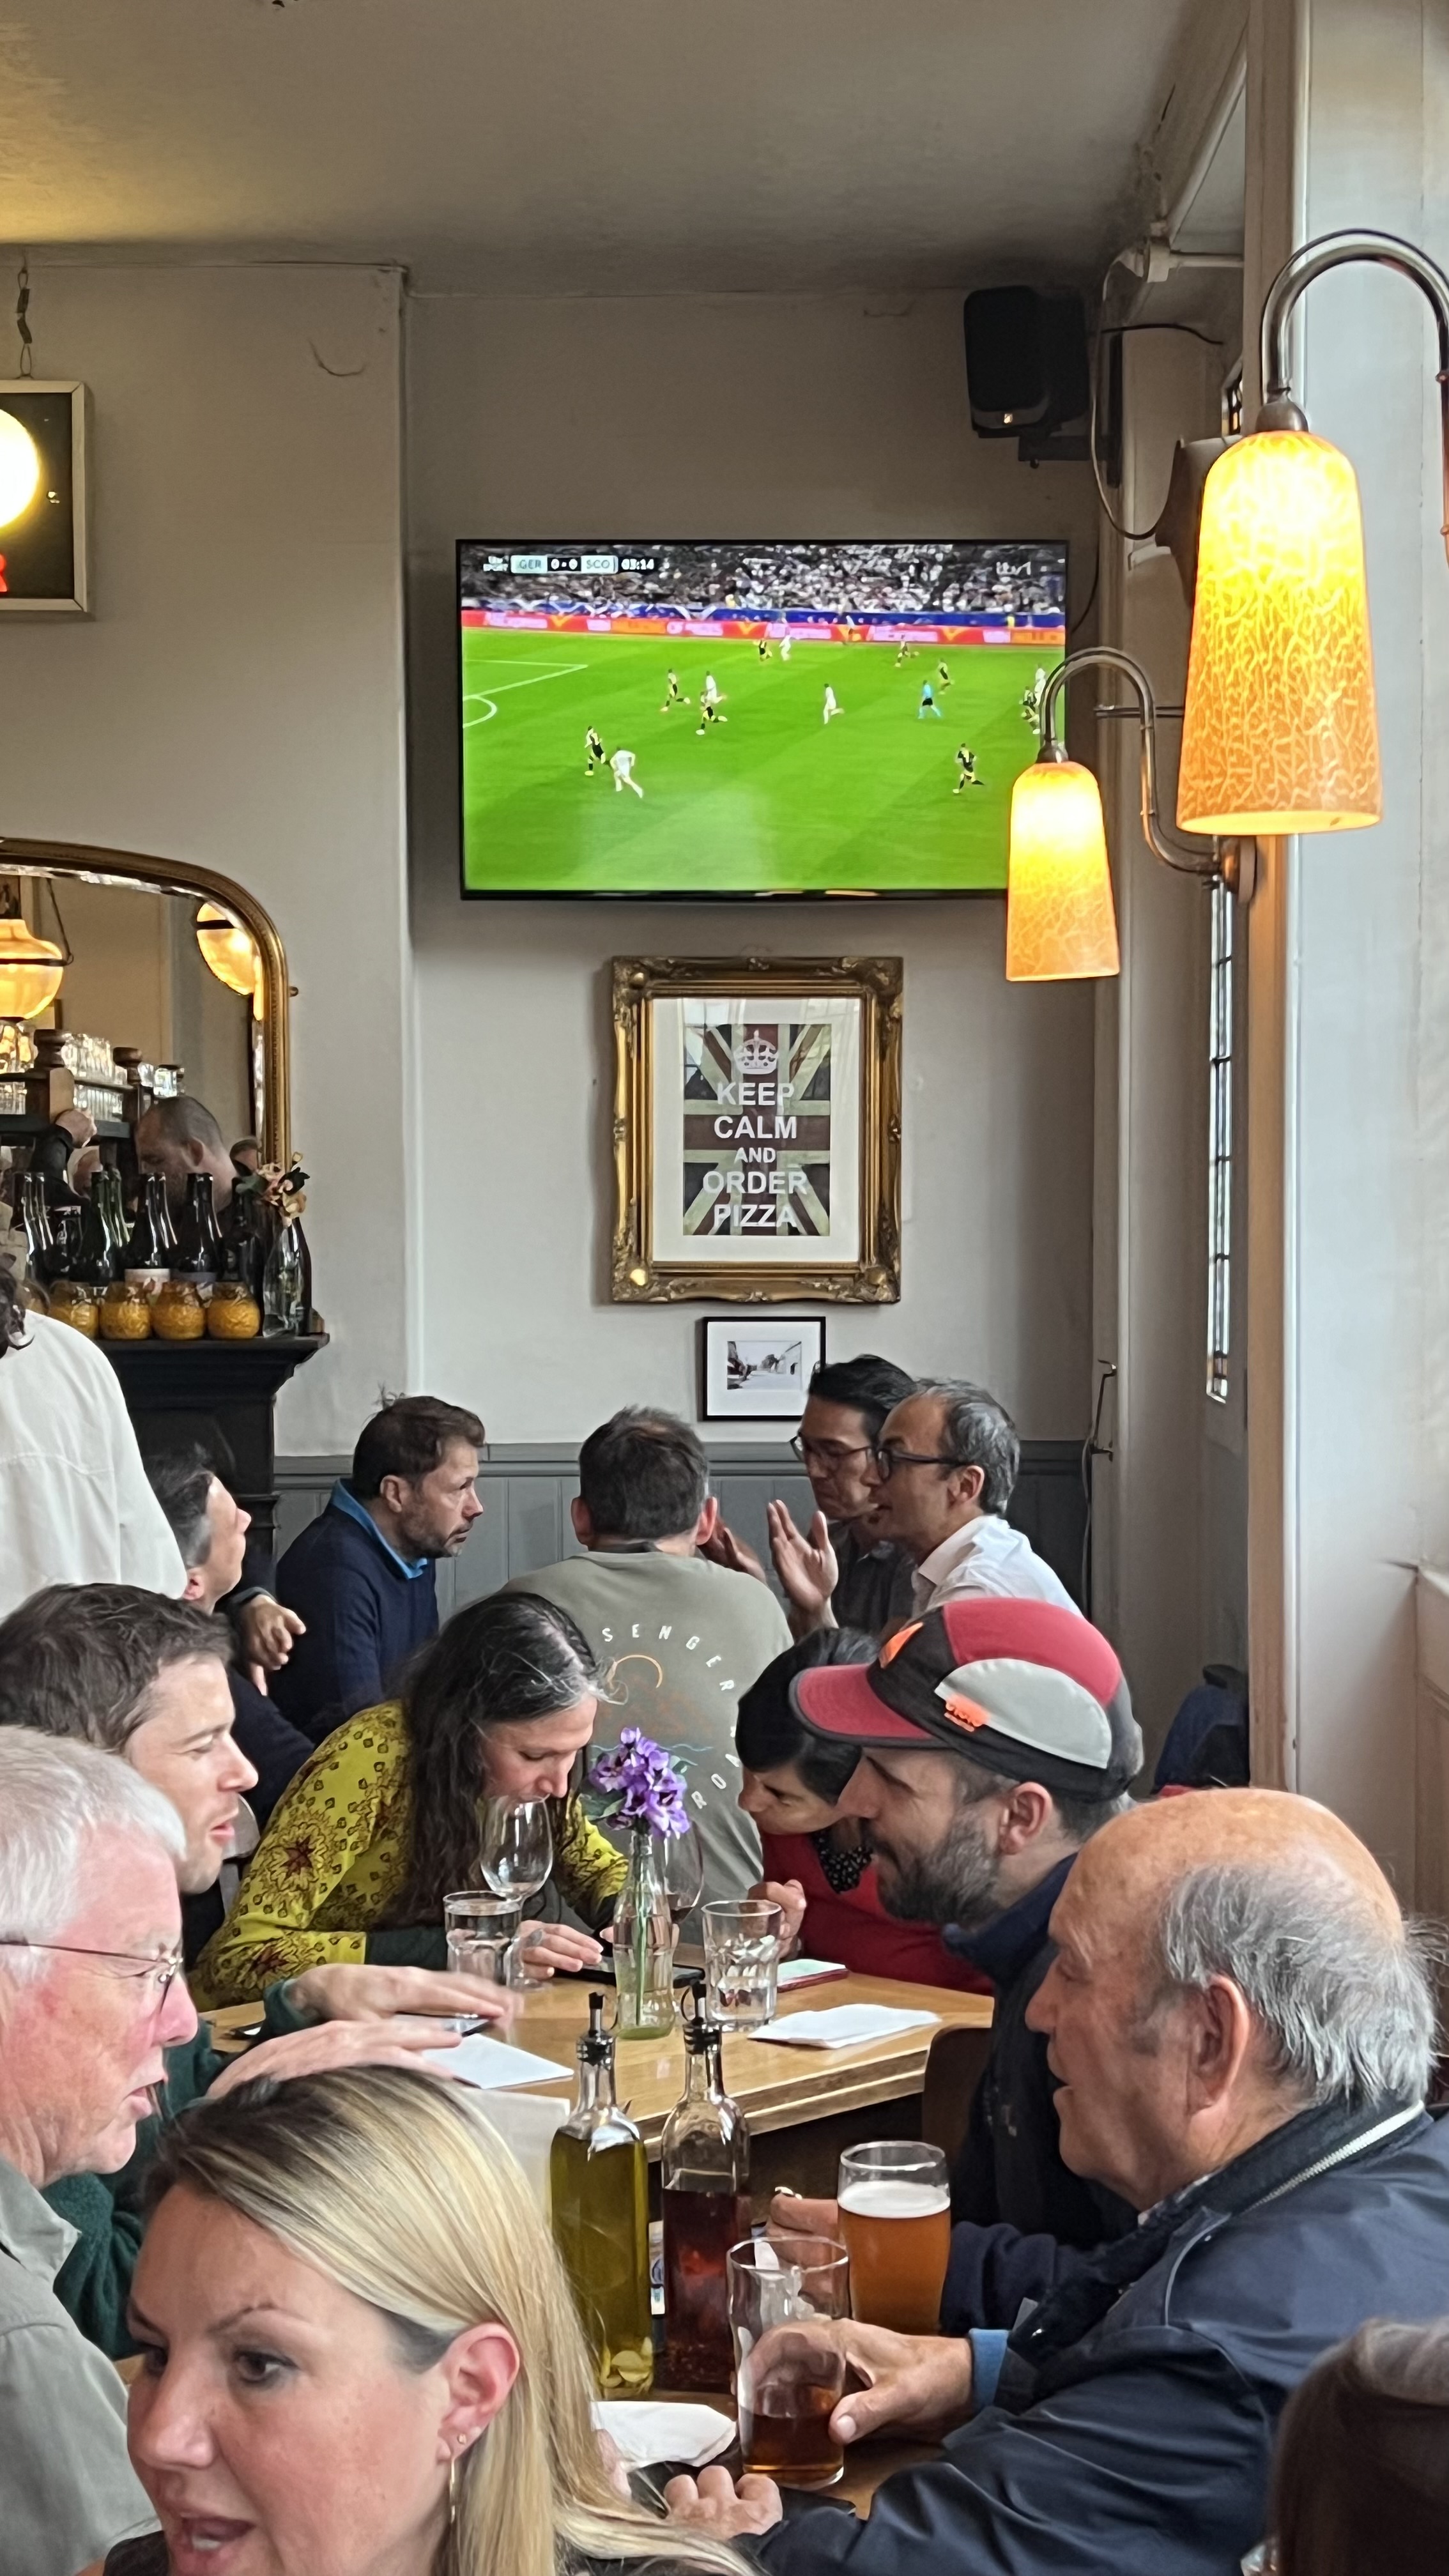 People sitting in the Mitre with a TV mounted on a wall overhead